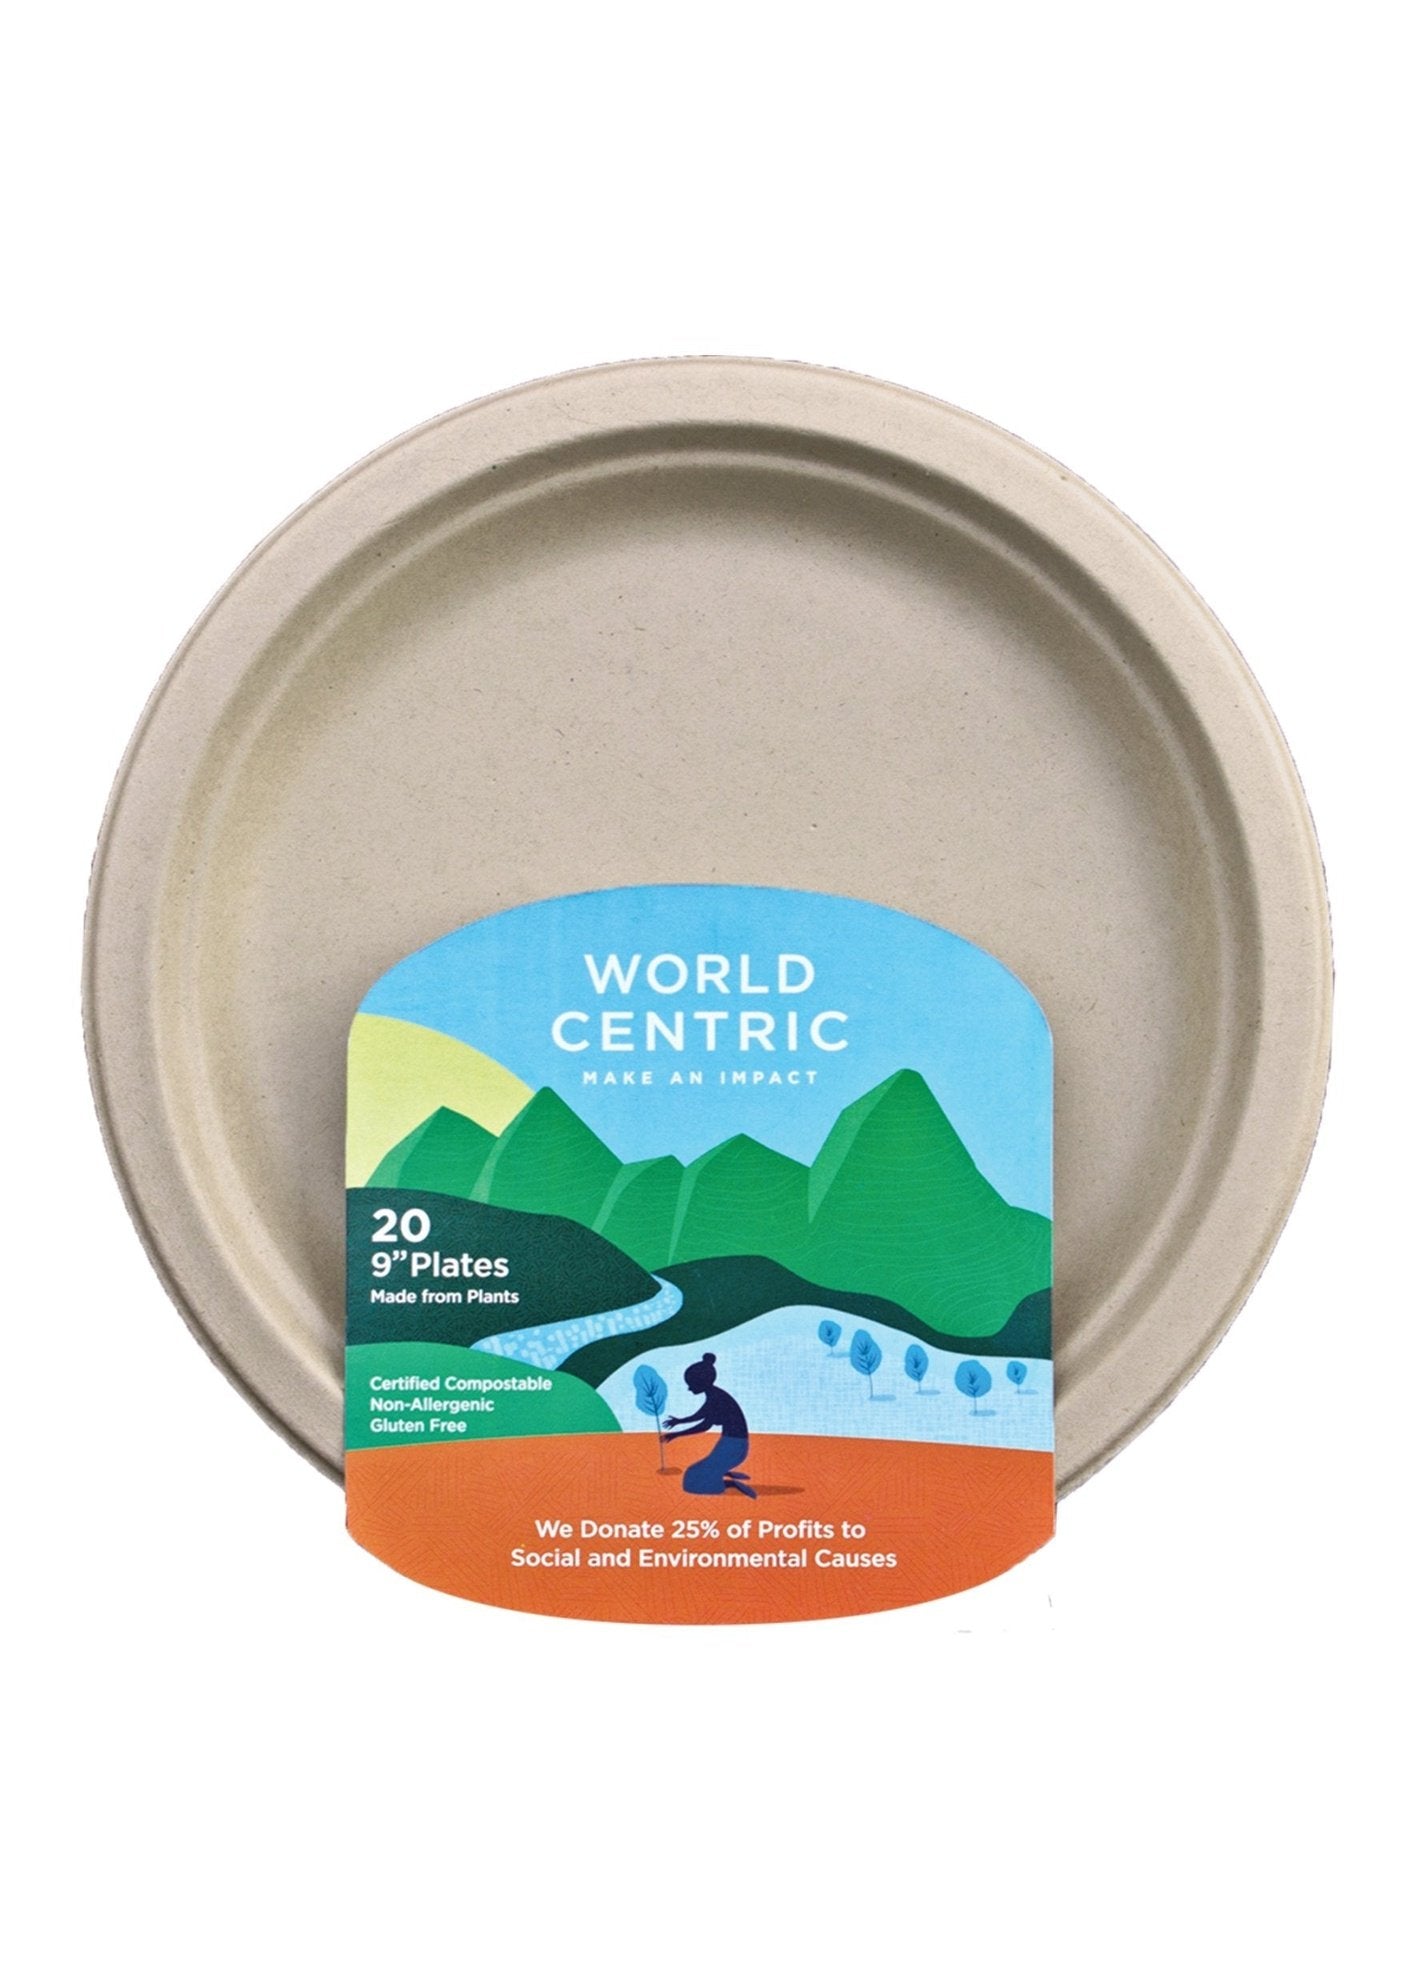 WORLD CENTRIC Compostable Plates